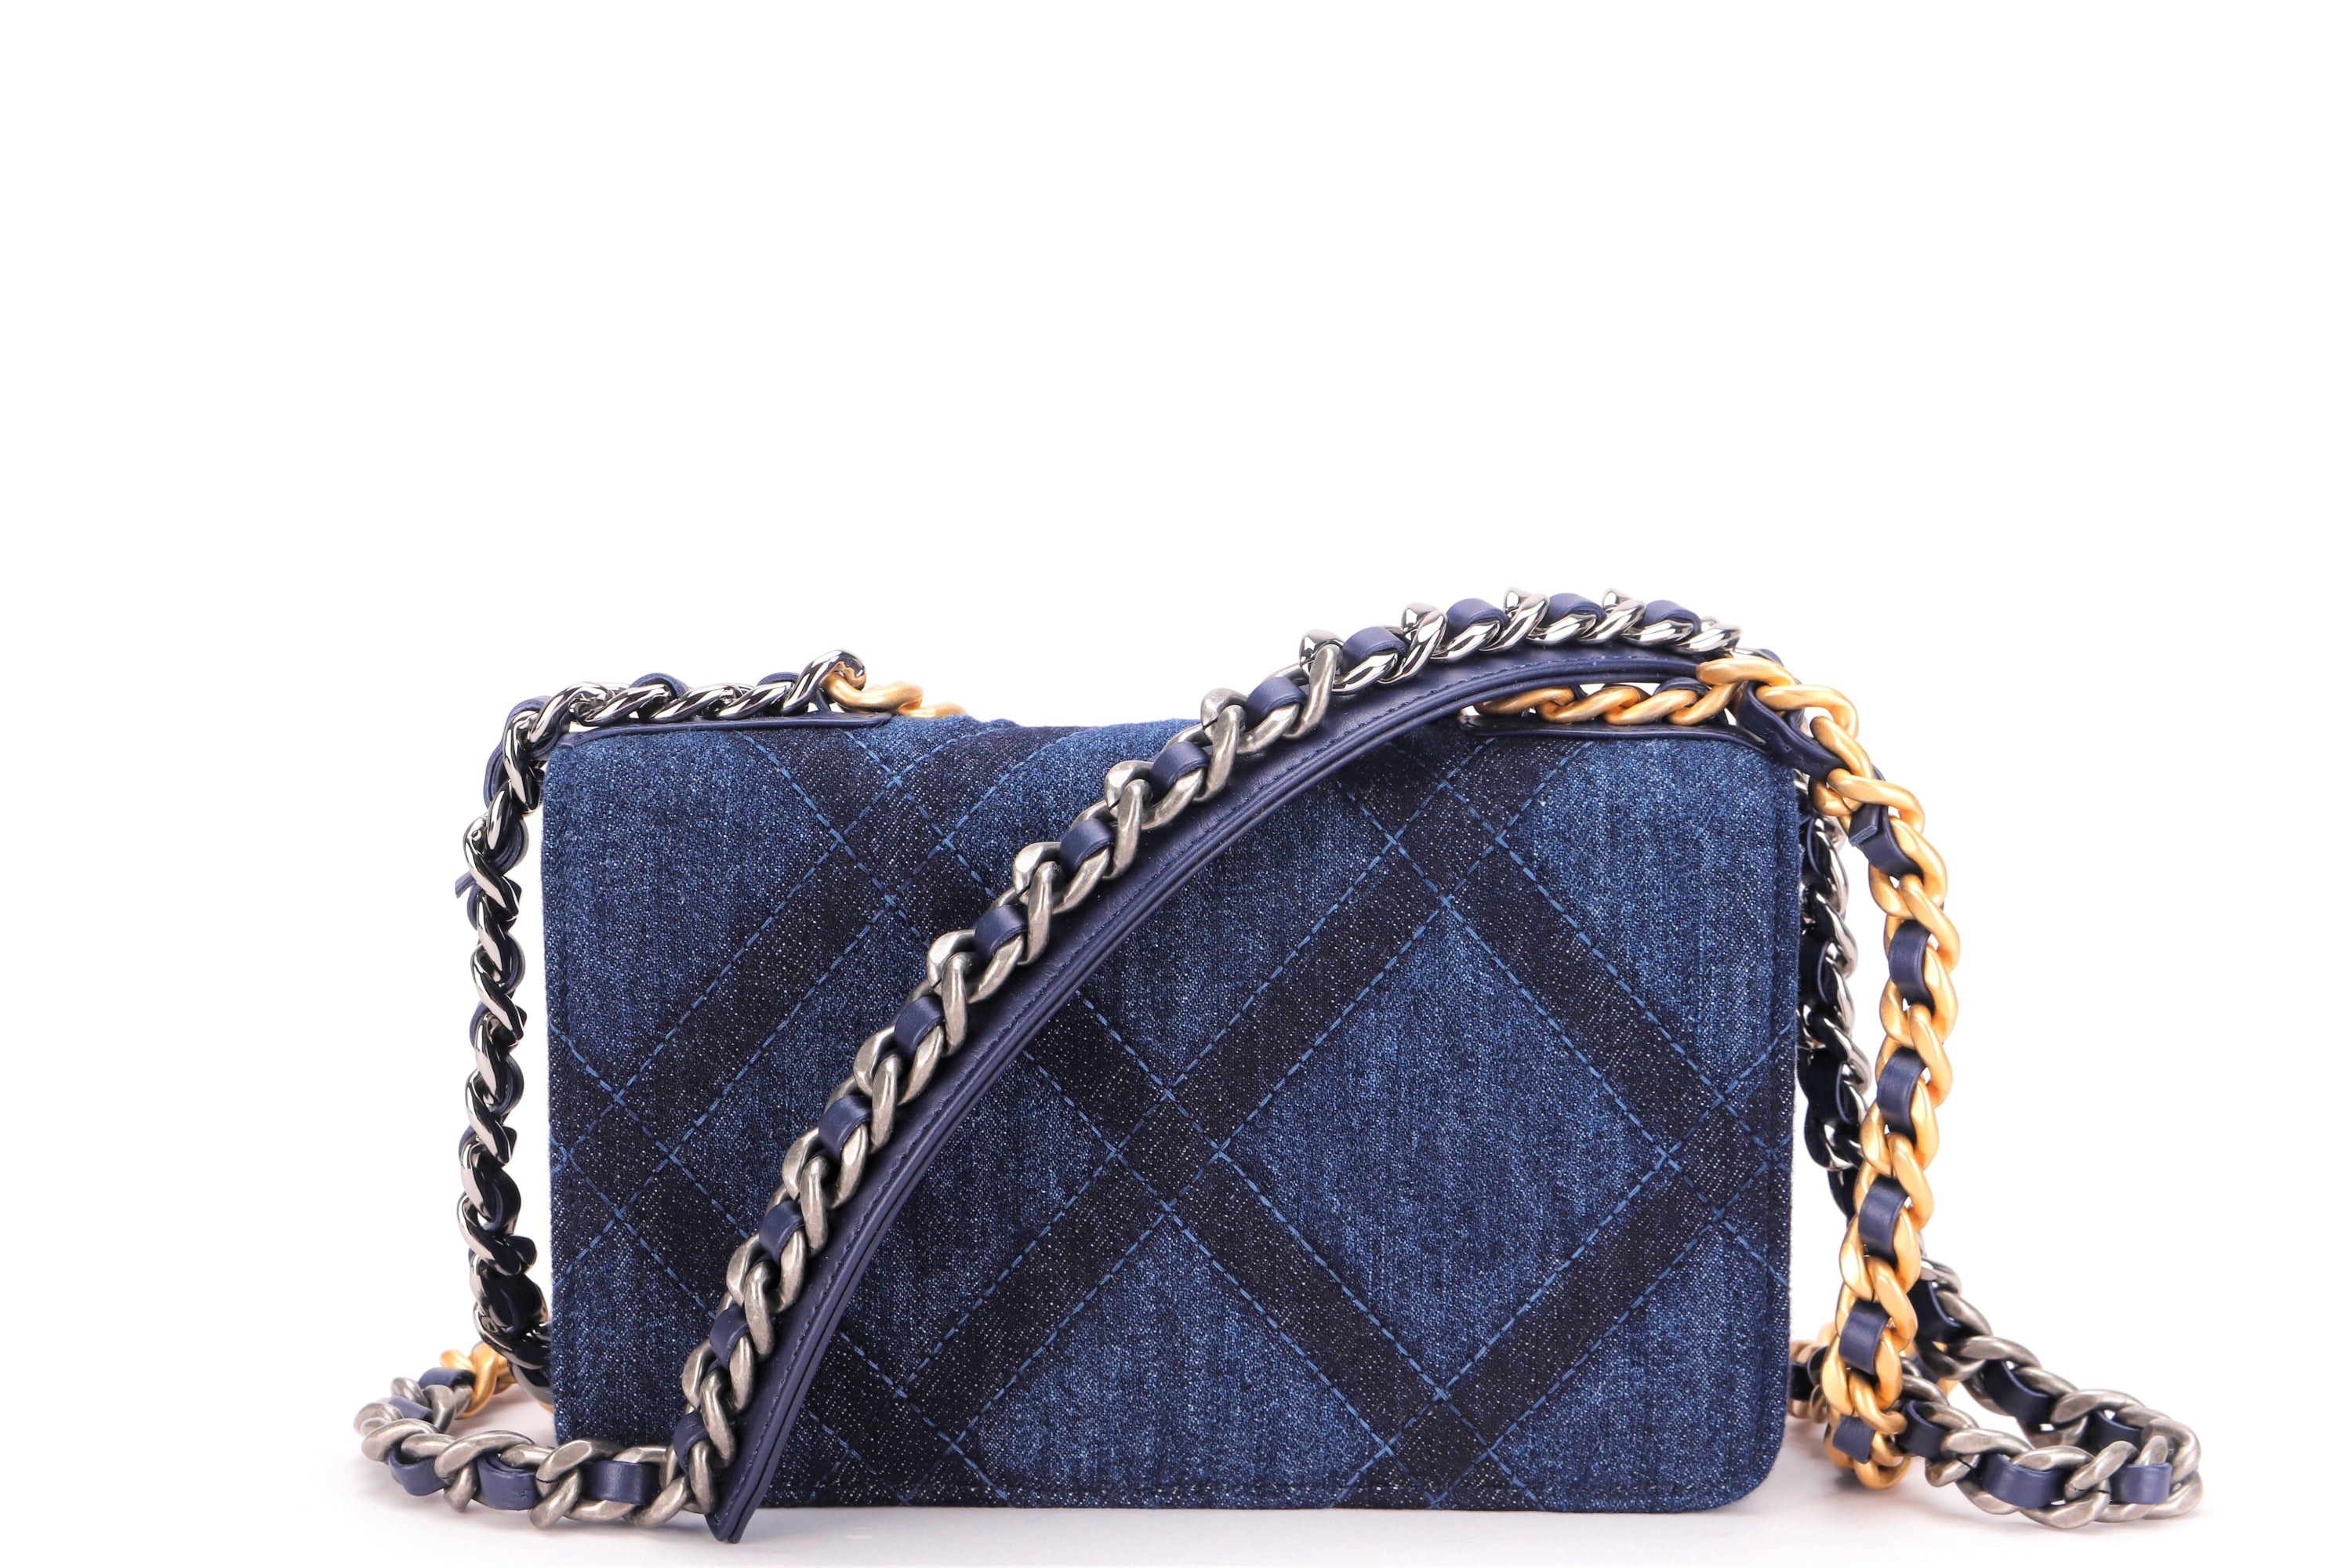 CHANEL 19 BLUE DENIM WALLET ON CHAIN (JX7Txxxx), WITH DUST COVER